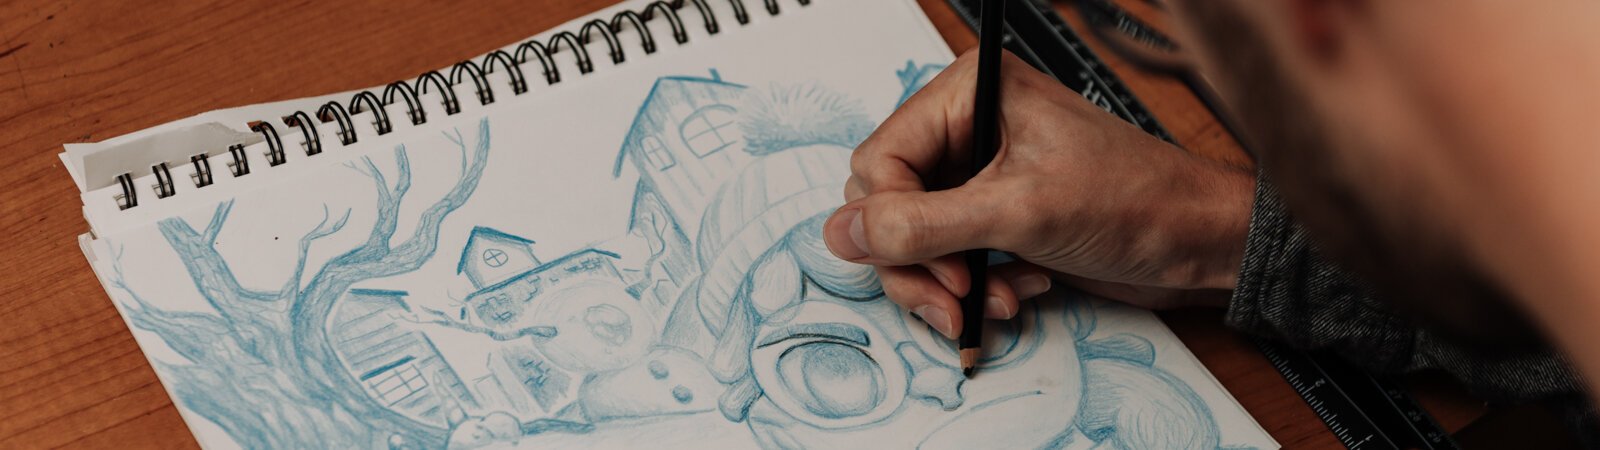 Artist James Newton works on sketching a picture book concept at his home studio in Roanoke.